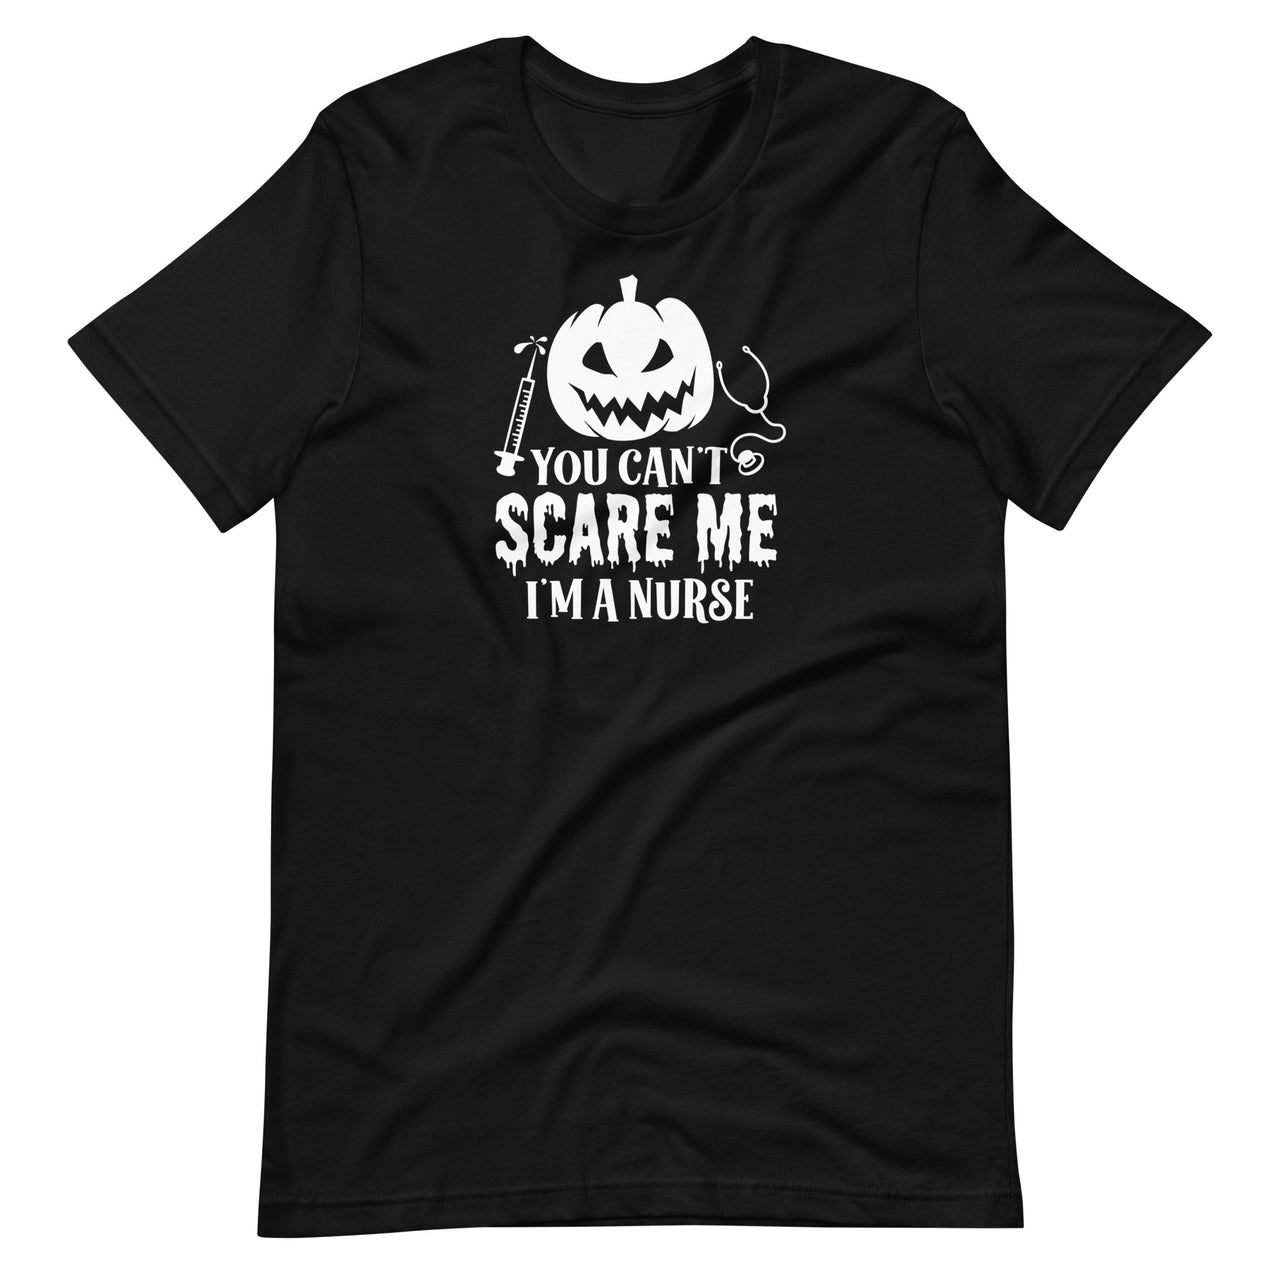 You Can't Scare Me I'm a Nurse T-Shirt